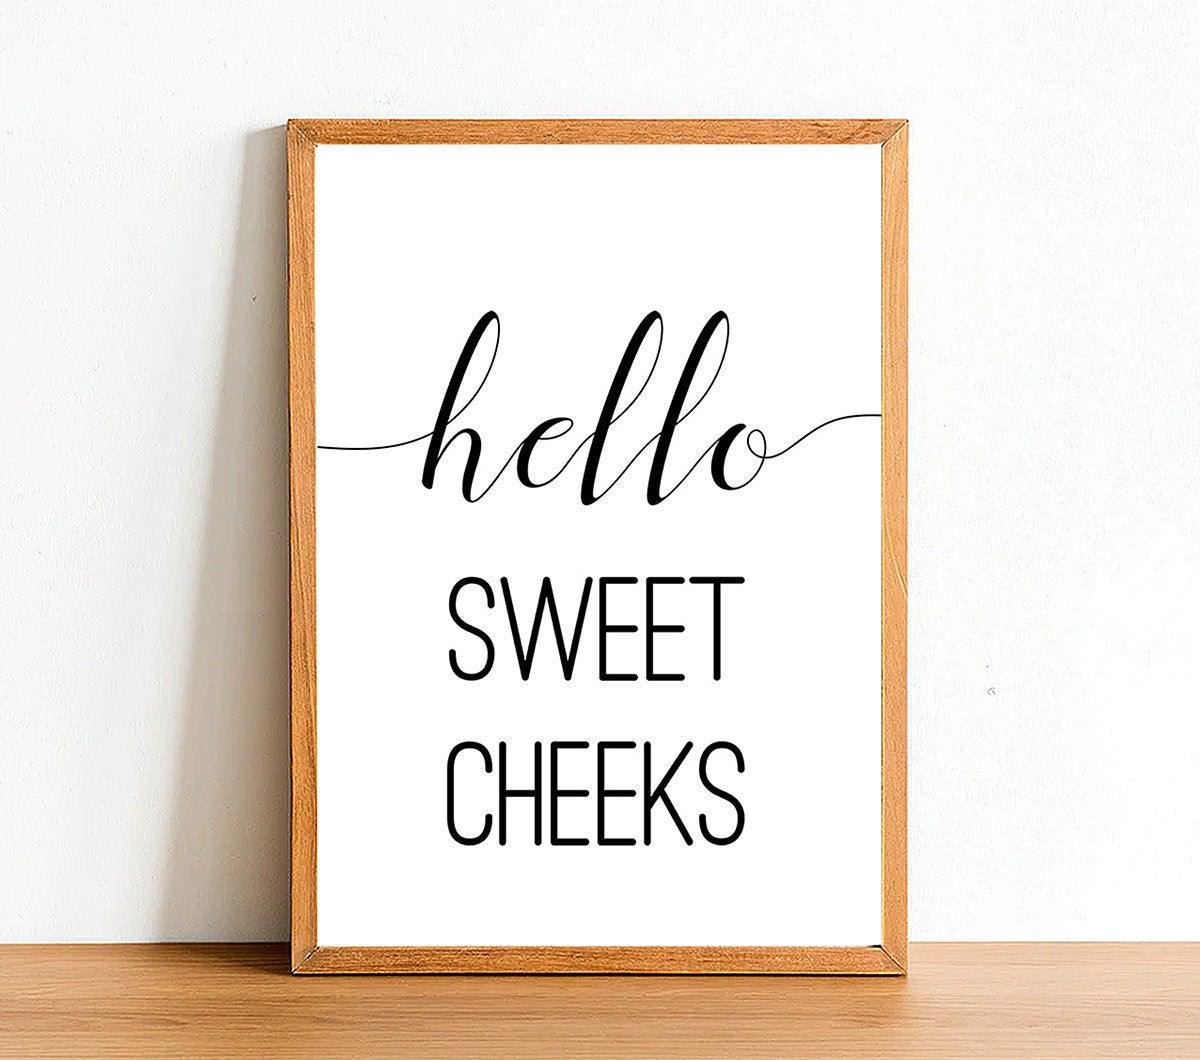 Hello Sweet Cheeks - Bathroom Poster - Classic Posters